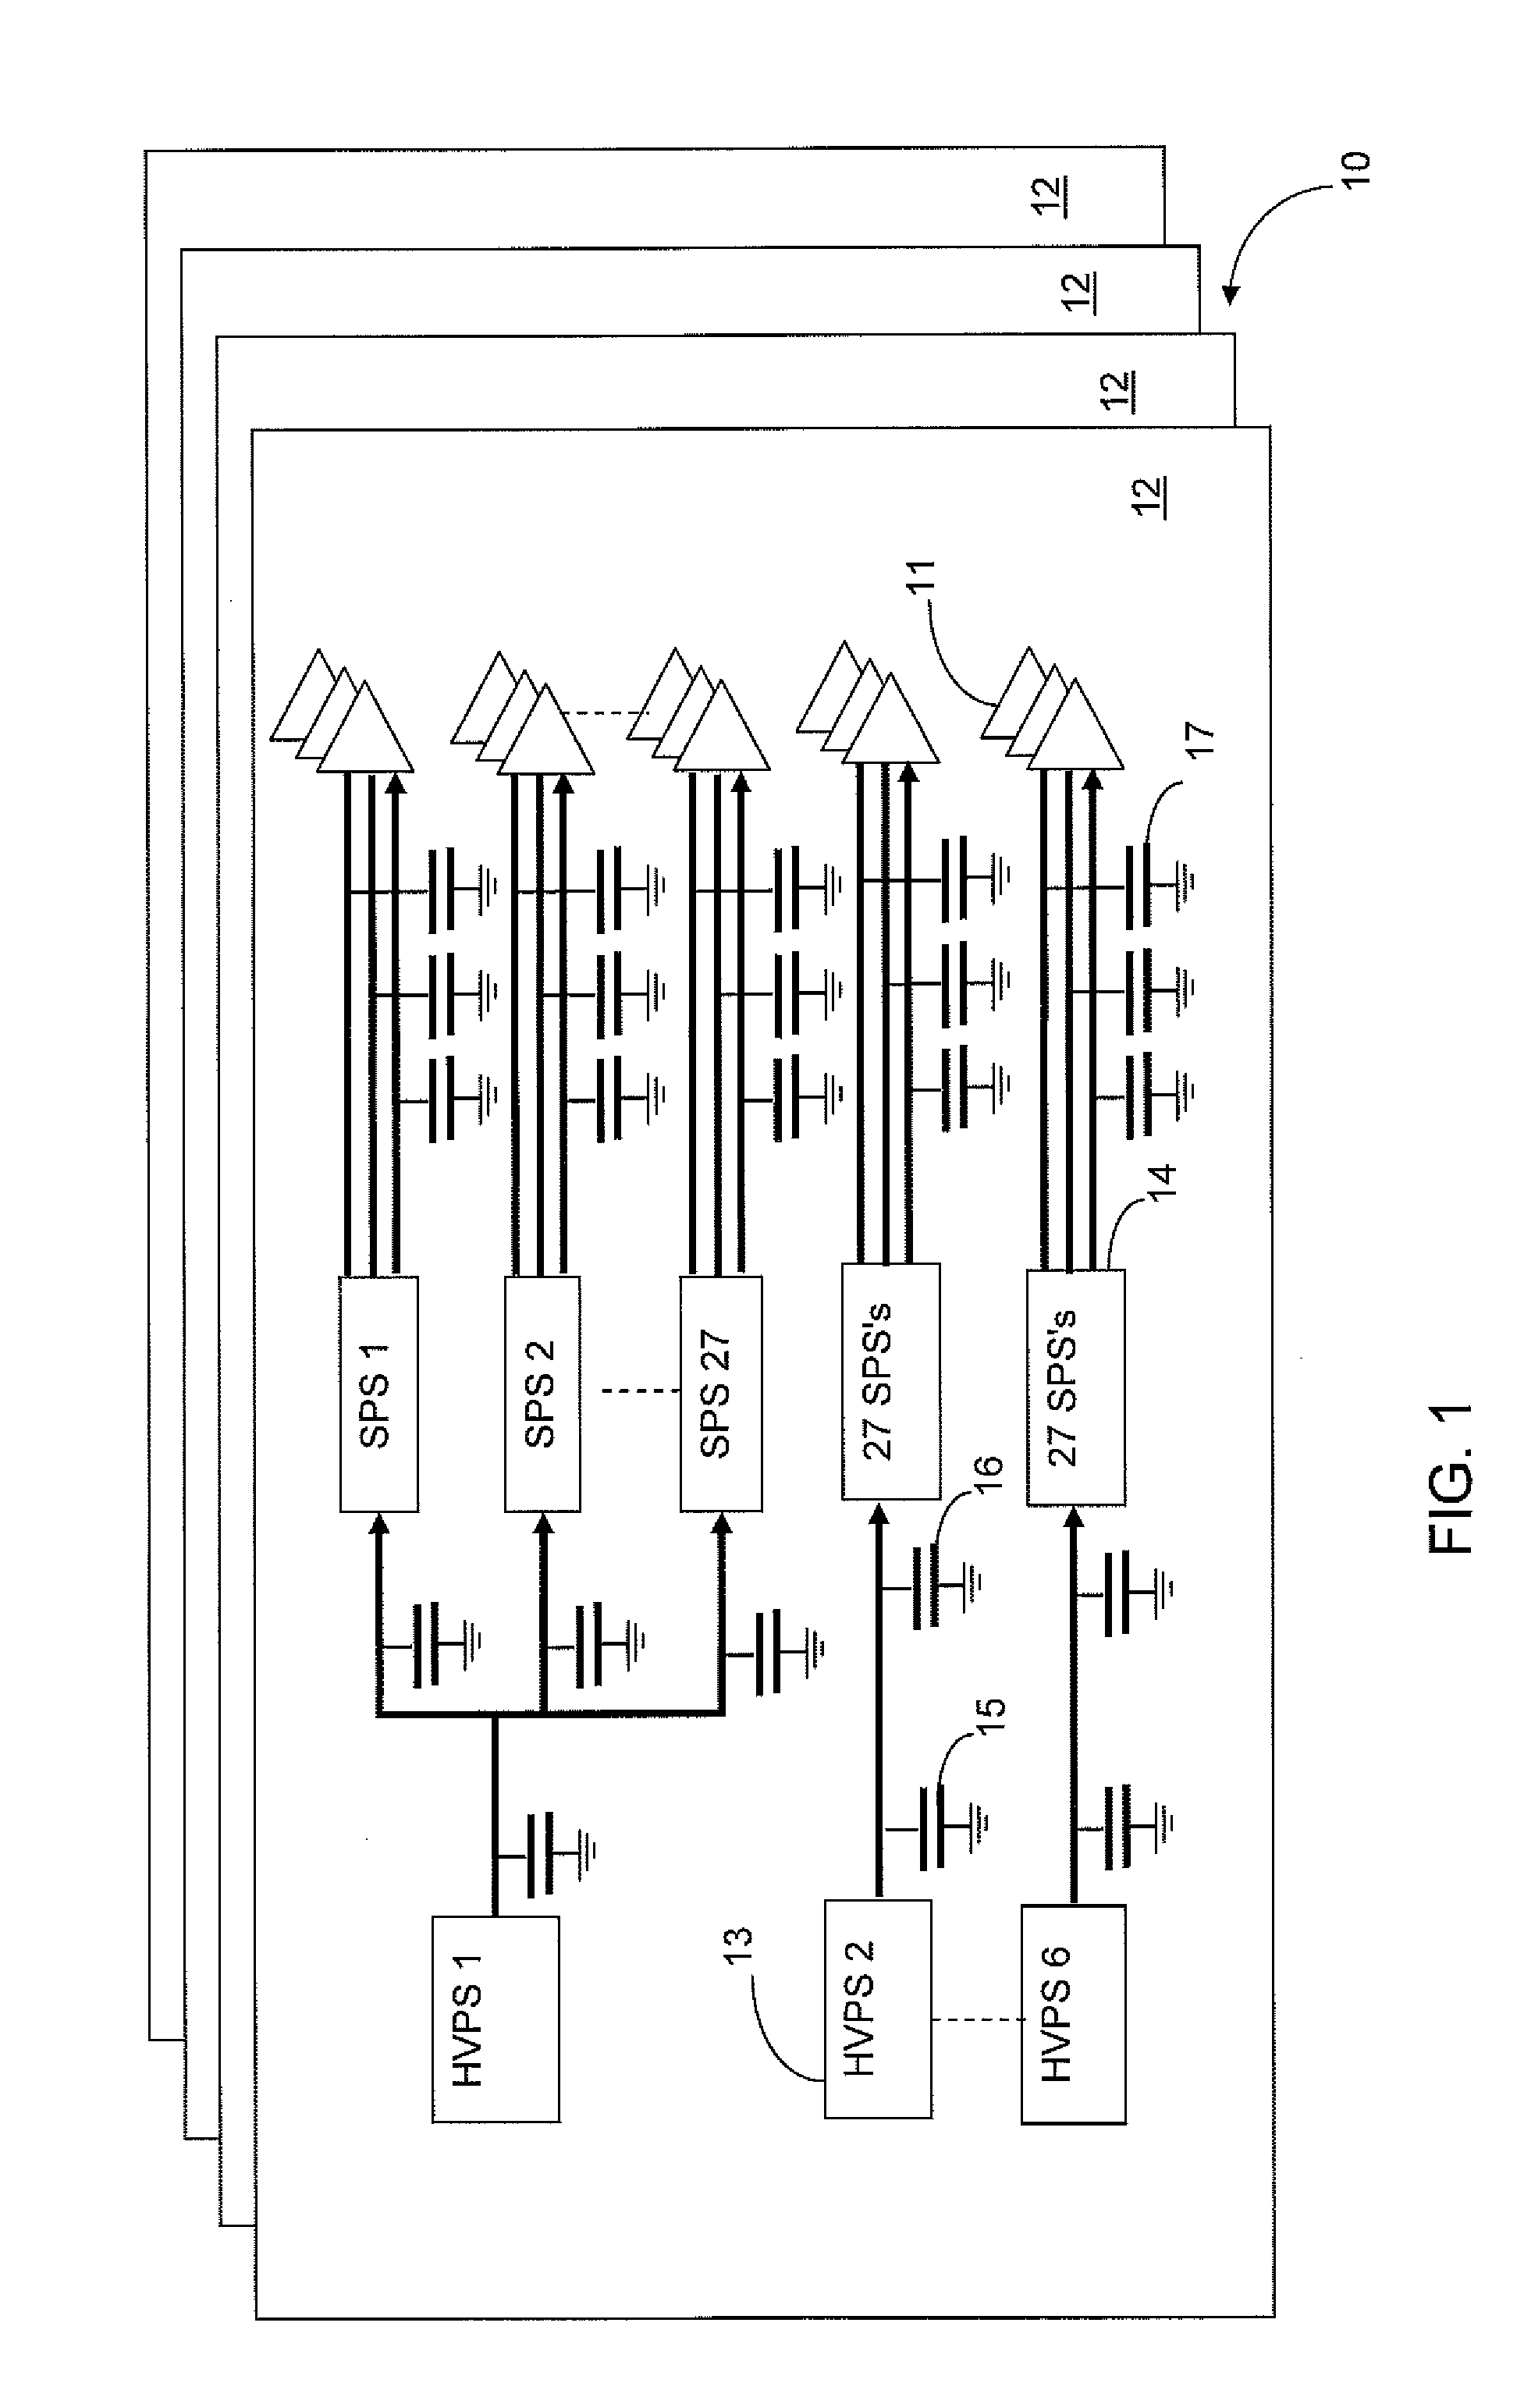 Power array for high power pulse load